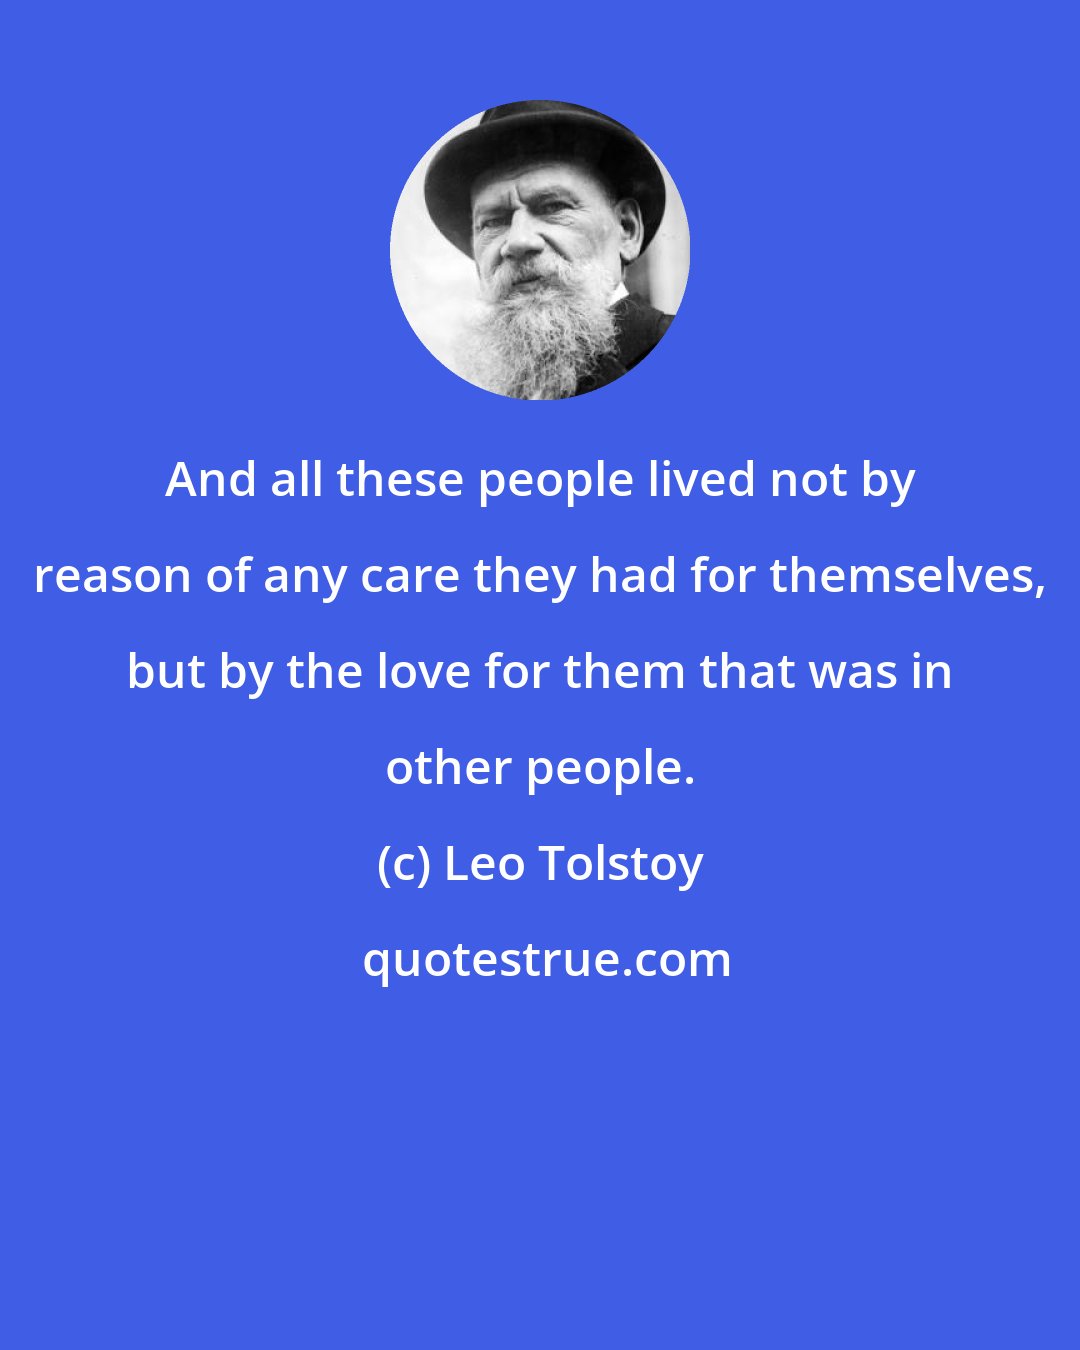 Leo Tolstoy: And all these people lived not by reason of any care they had for themselves, but by the love for them that was in other people.